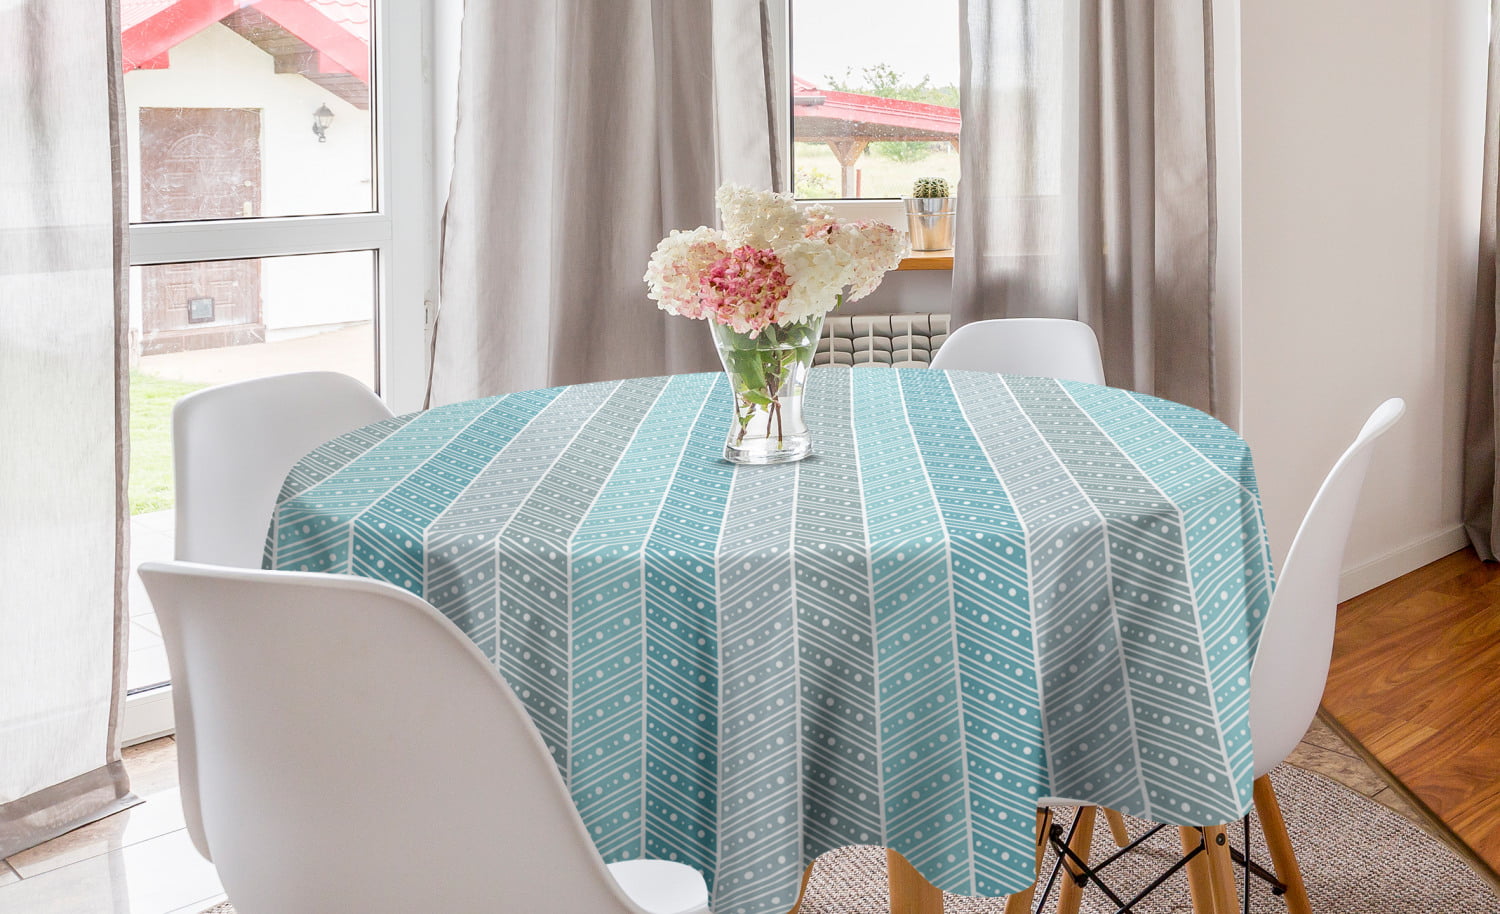 Find 69+ Beautiful Plain Cotton Dining Room Table Cloth Most Trending, Most Beautiful, And Most Suitable